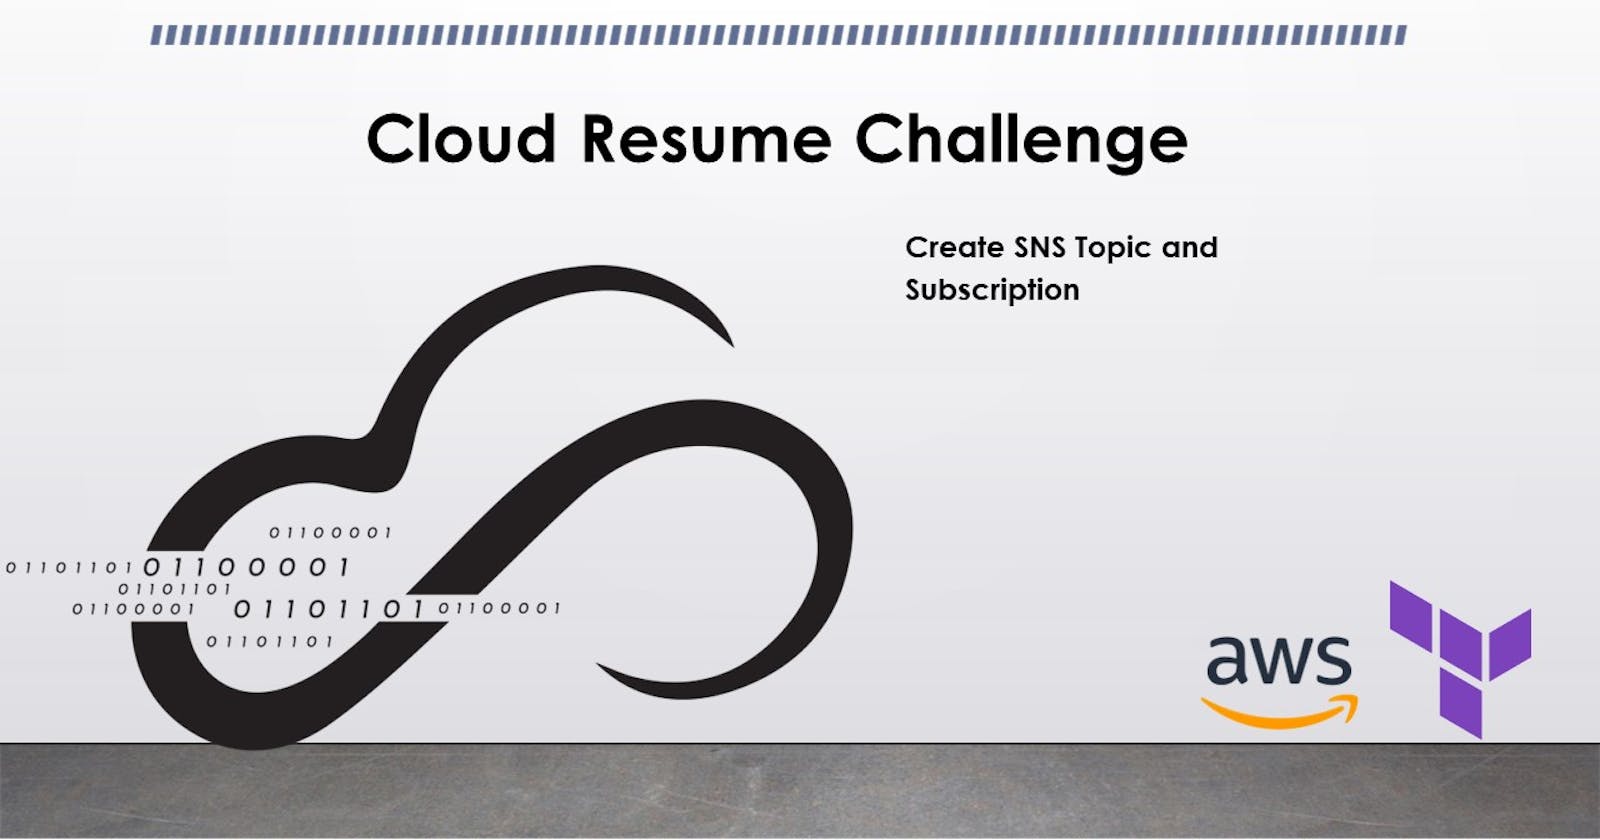 7. Cloud Resume Challenge: Creating SNS Topic and Subscription